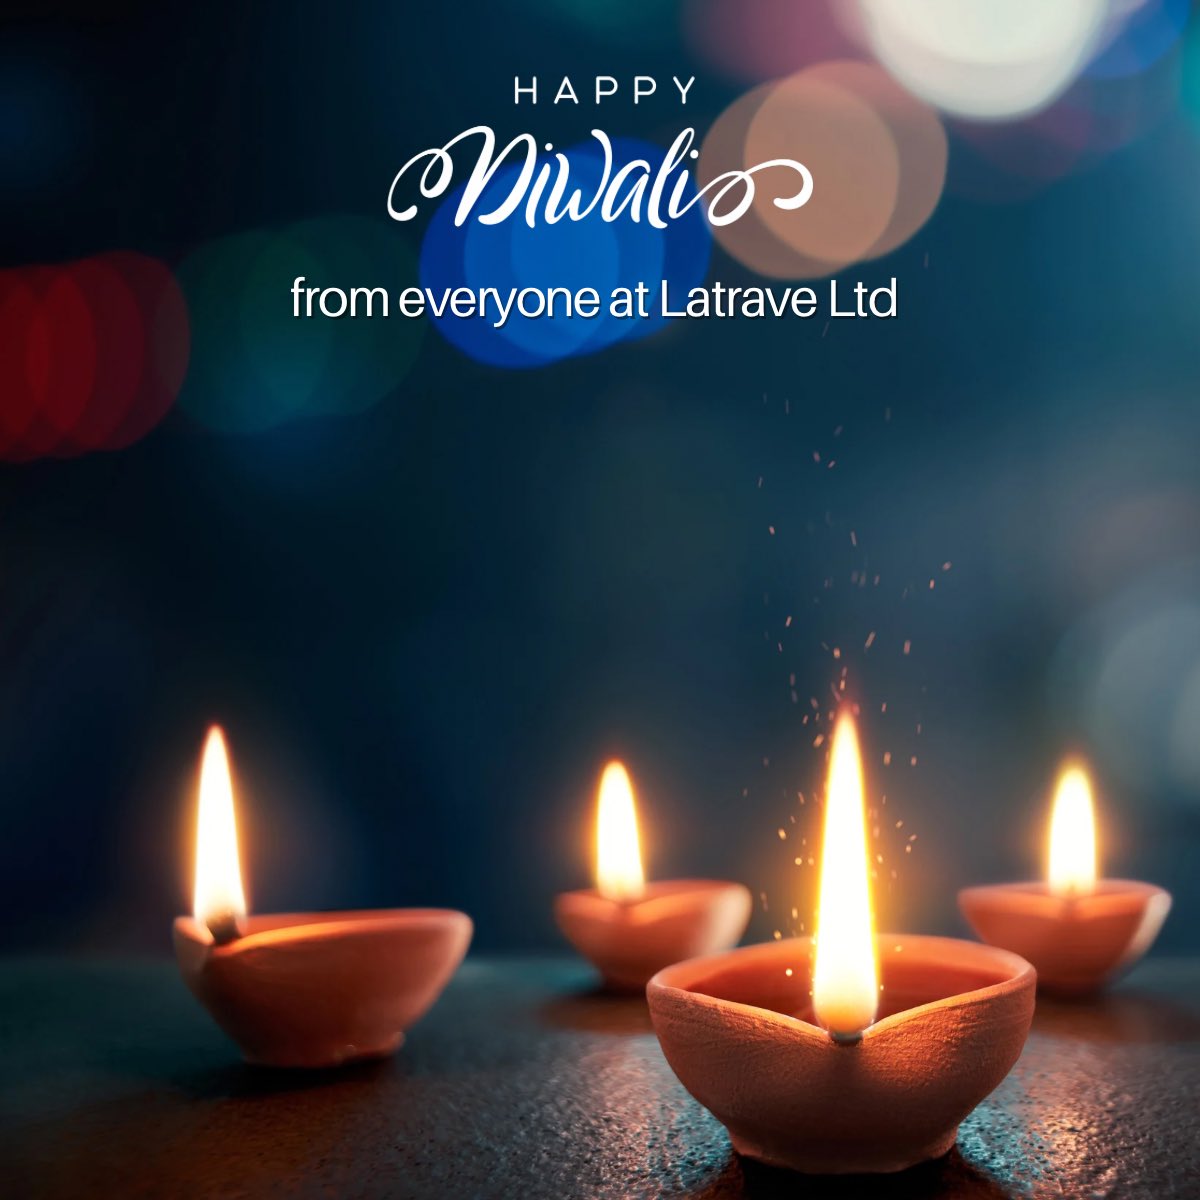 Happy Diwali to all of our clients, customers and colleagues who are celebrating 🎉

#diwali #india #festival #happydiwali #love #diwaligifts #diwalidecorations #diwalidecor